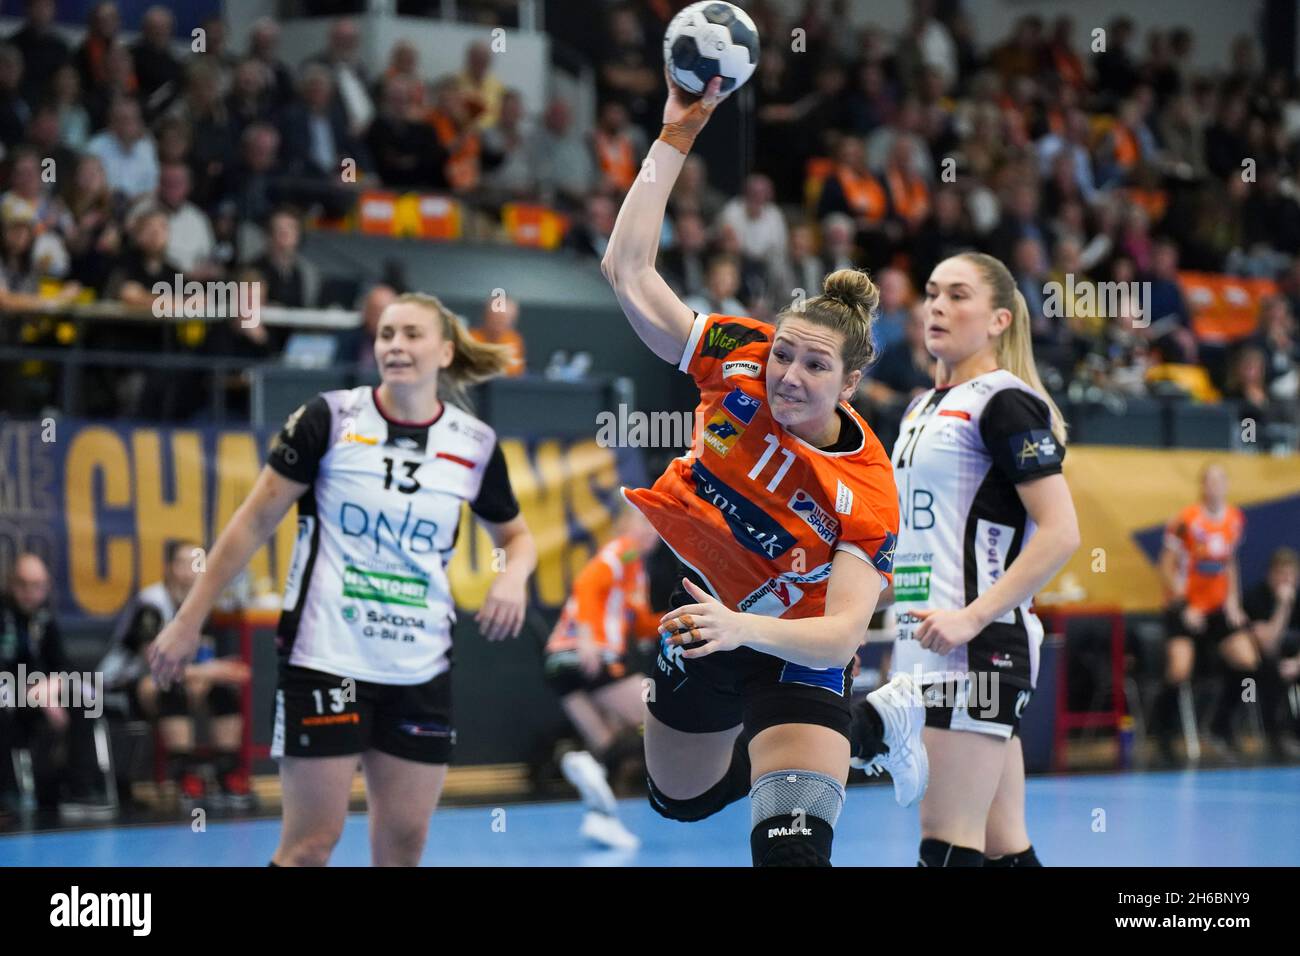 Odense, Denmark. 14th Nov, 2021. Rikke Iversen (11) of Odense Handball seen  in the DELO EHF Champions League match between Odense Handball and Vipers  Kristiansand at Sydbank Arena in Odense. (Photo Credit: